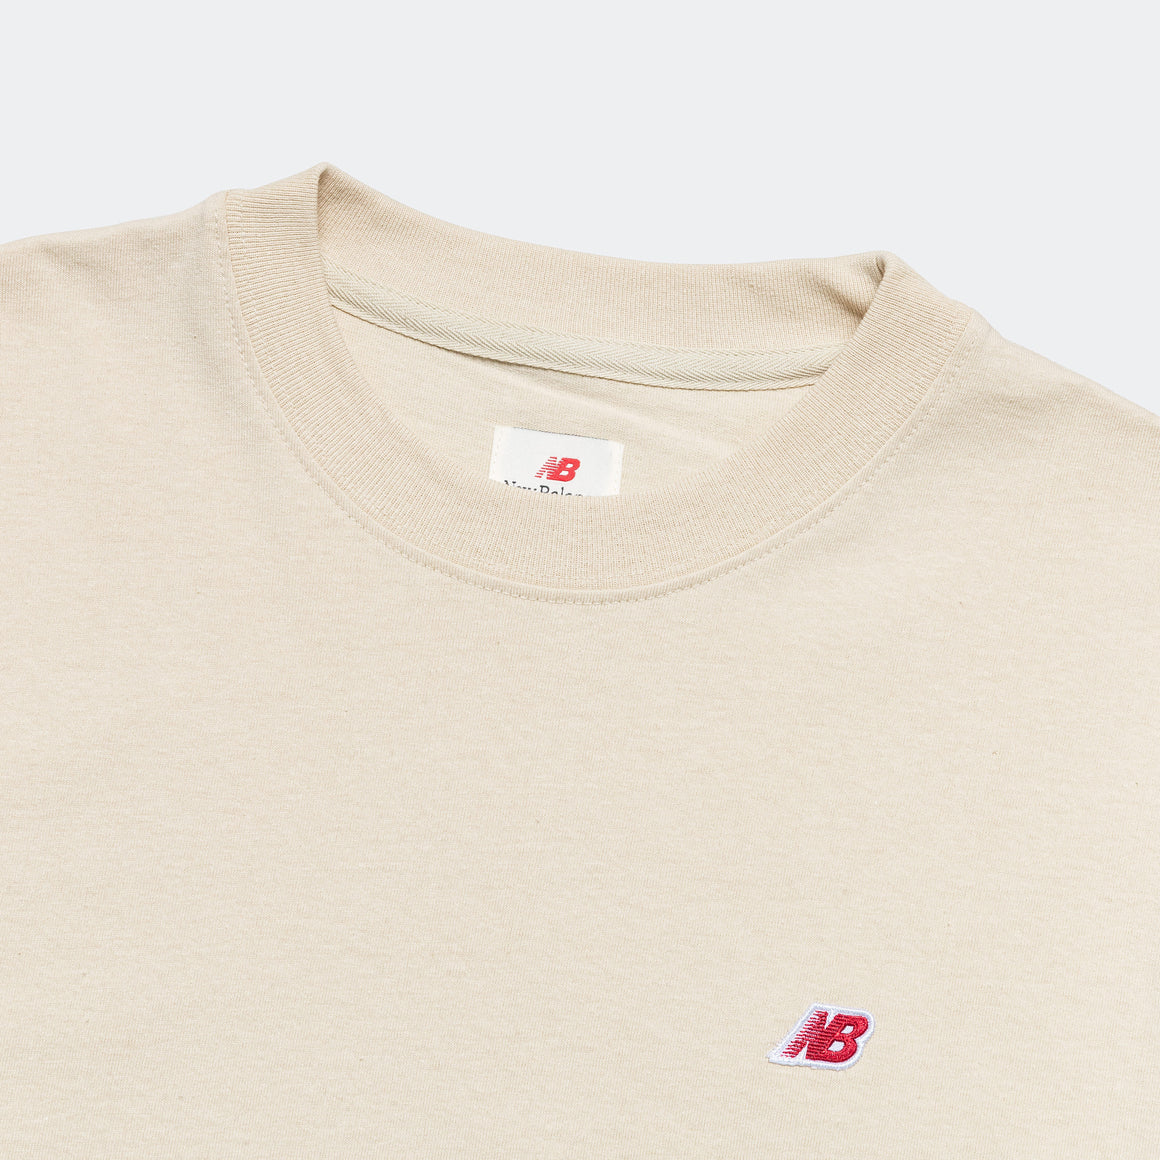 New Balance - MADE in USA Core SS Tee - Sandstone - UP THERE